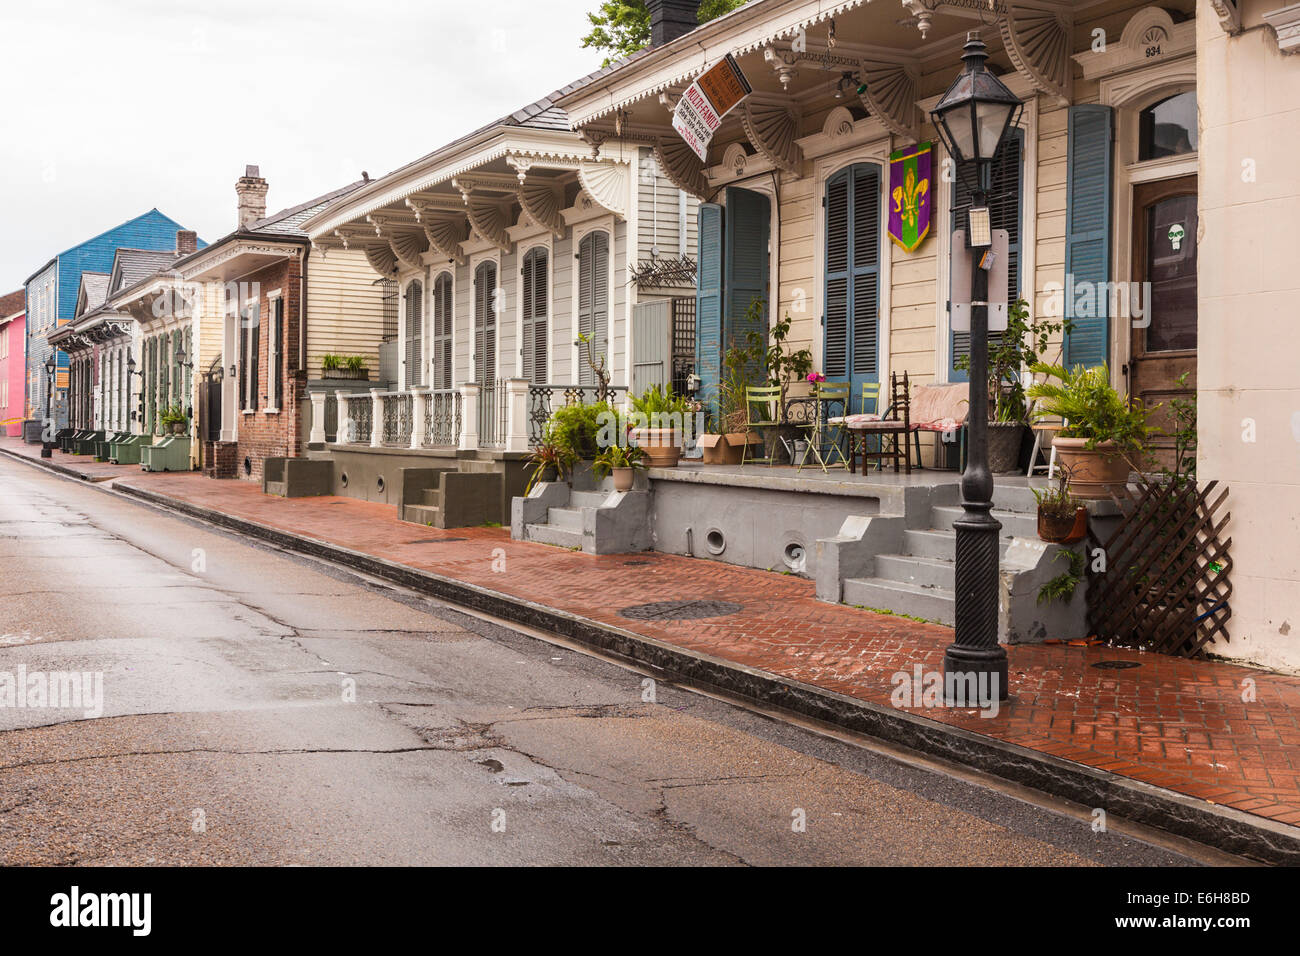 Typical residential street in the French Quarter of New Orleans, Louisiana Stock Photo